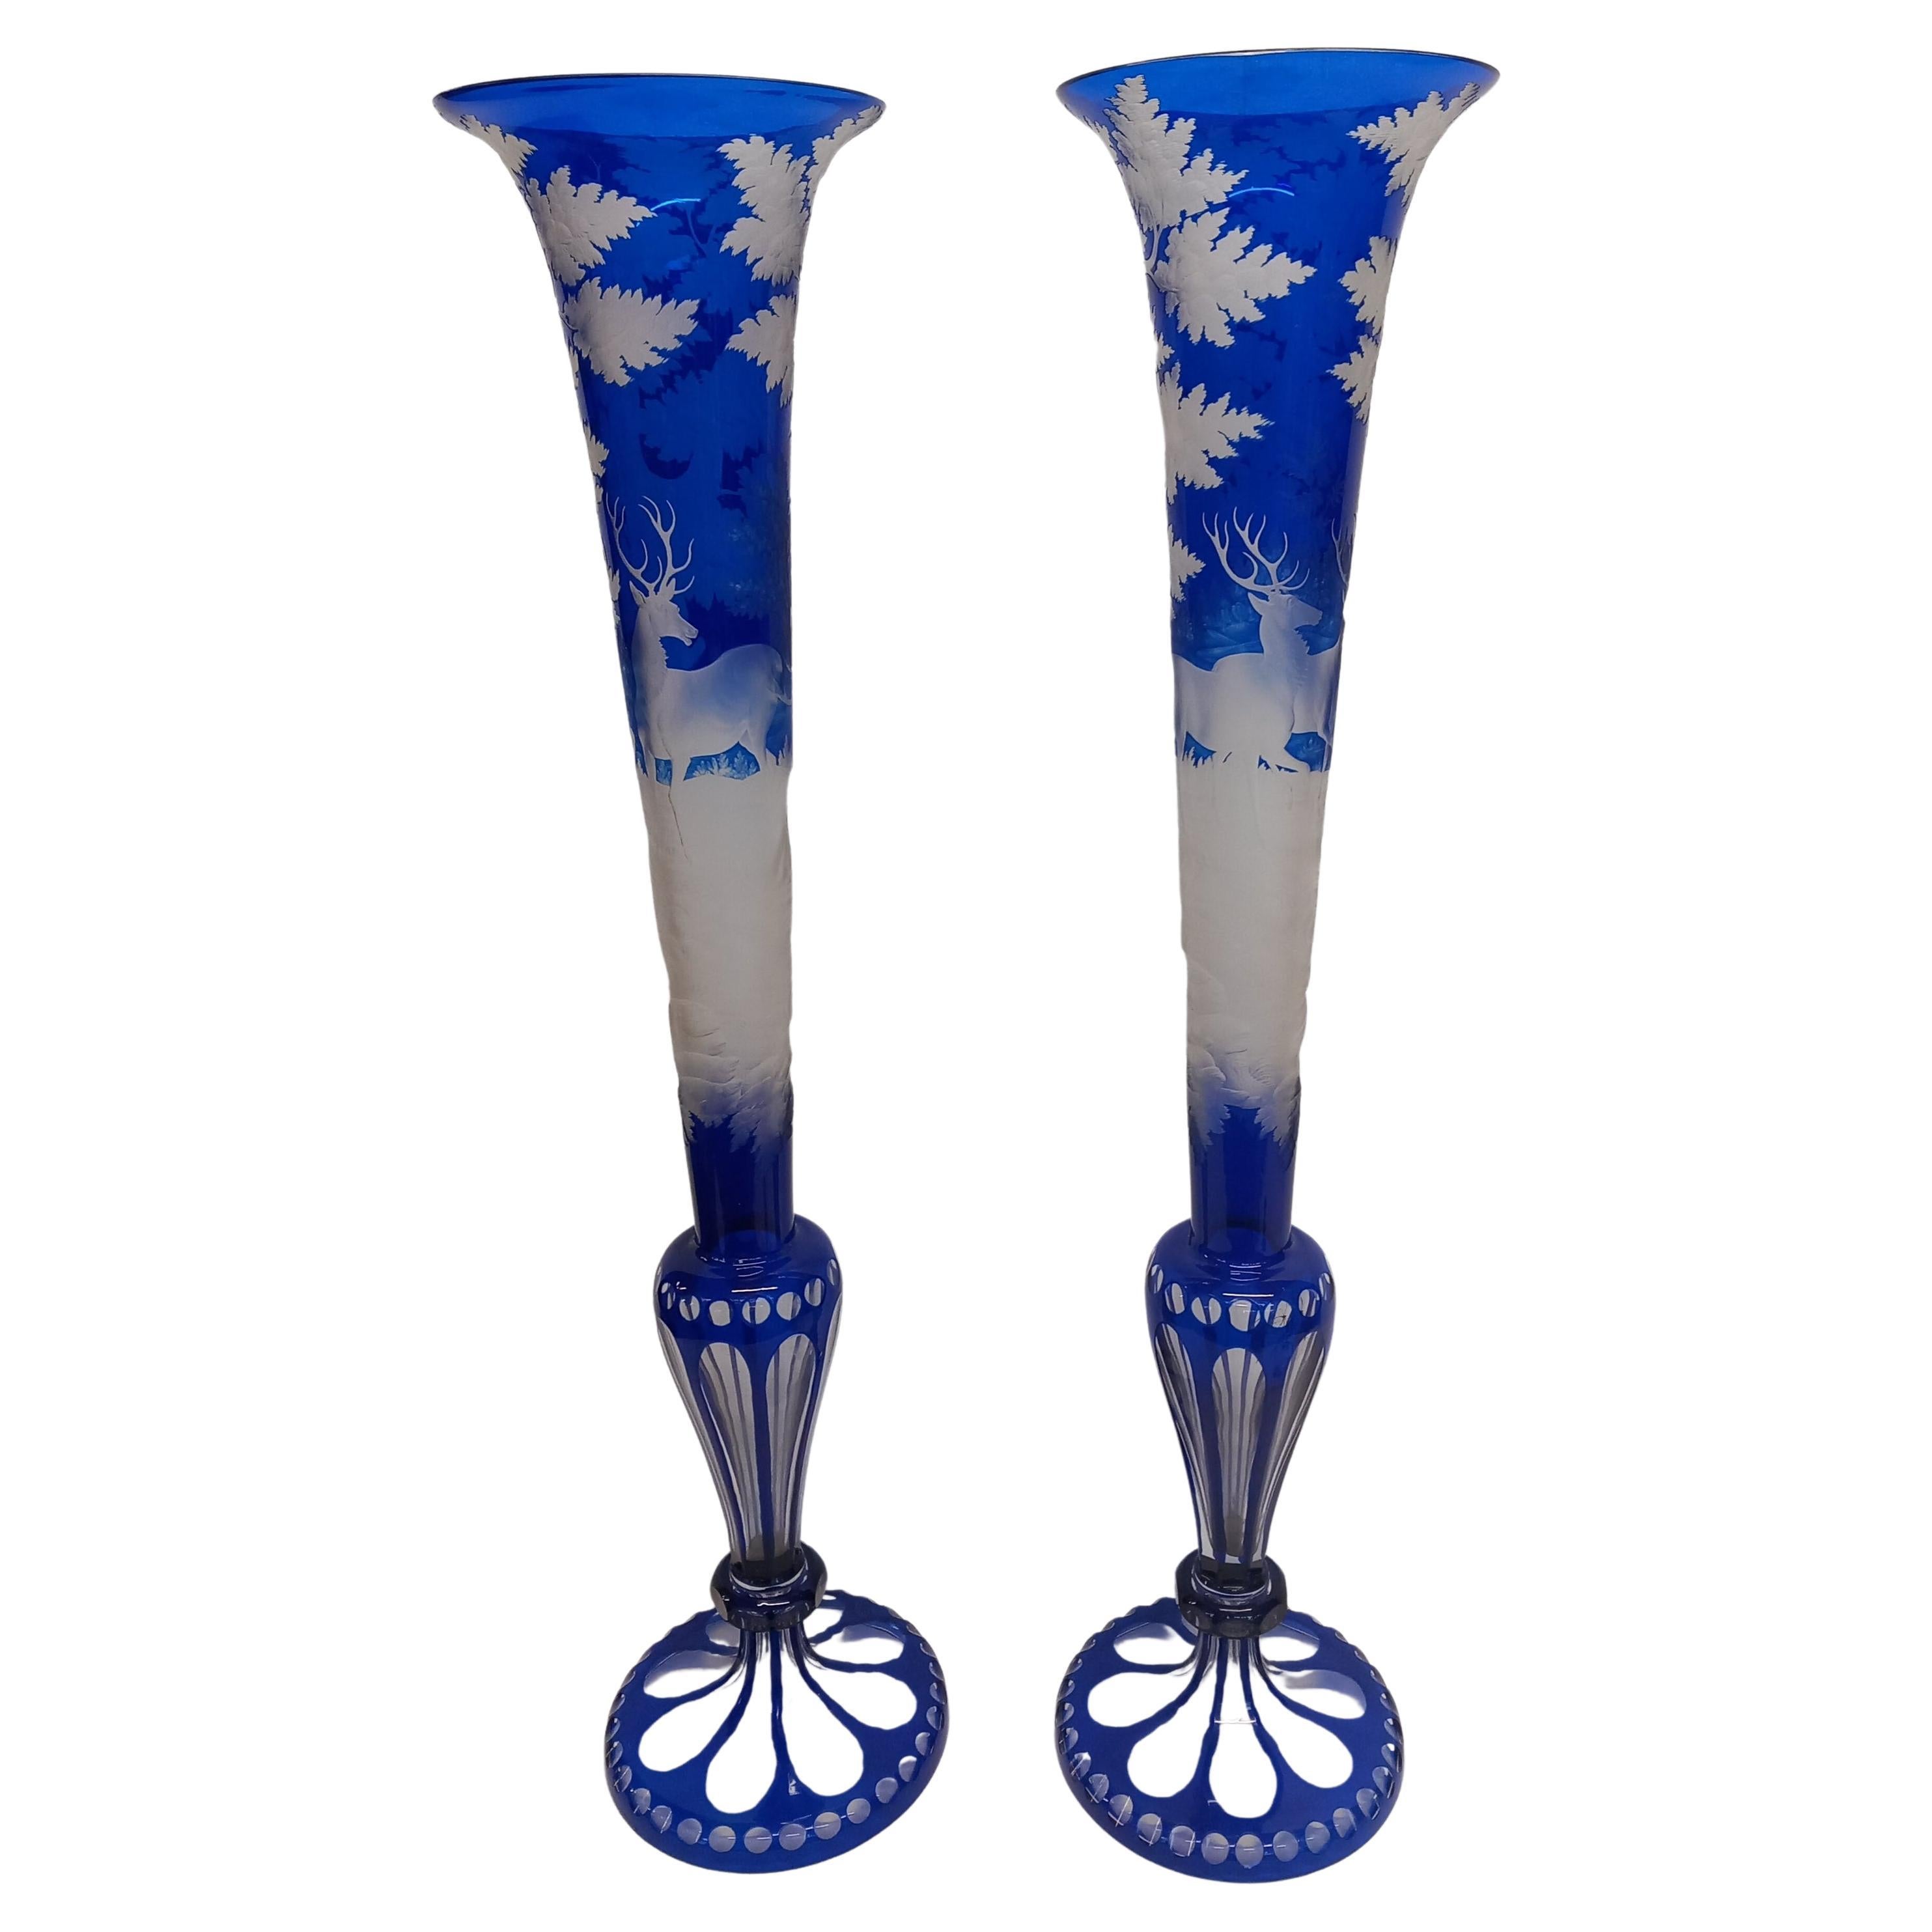  Pair of Large Overly Bohemain Trumpet Vases